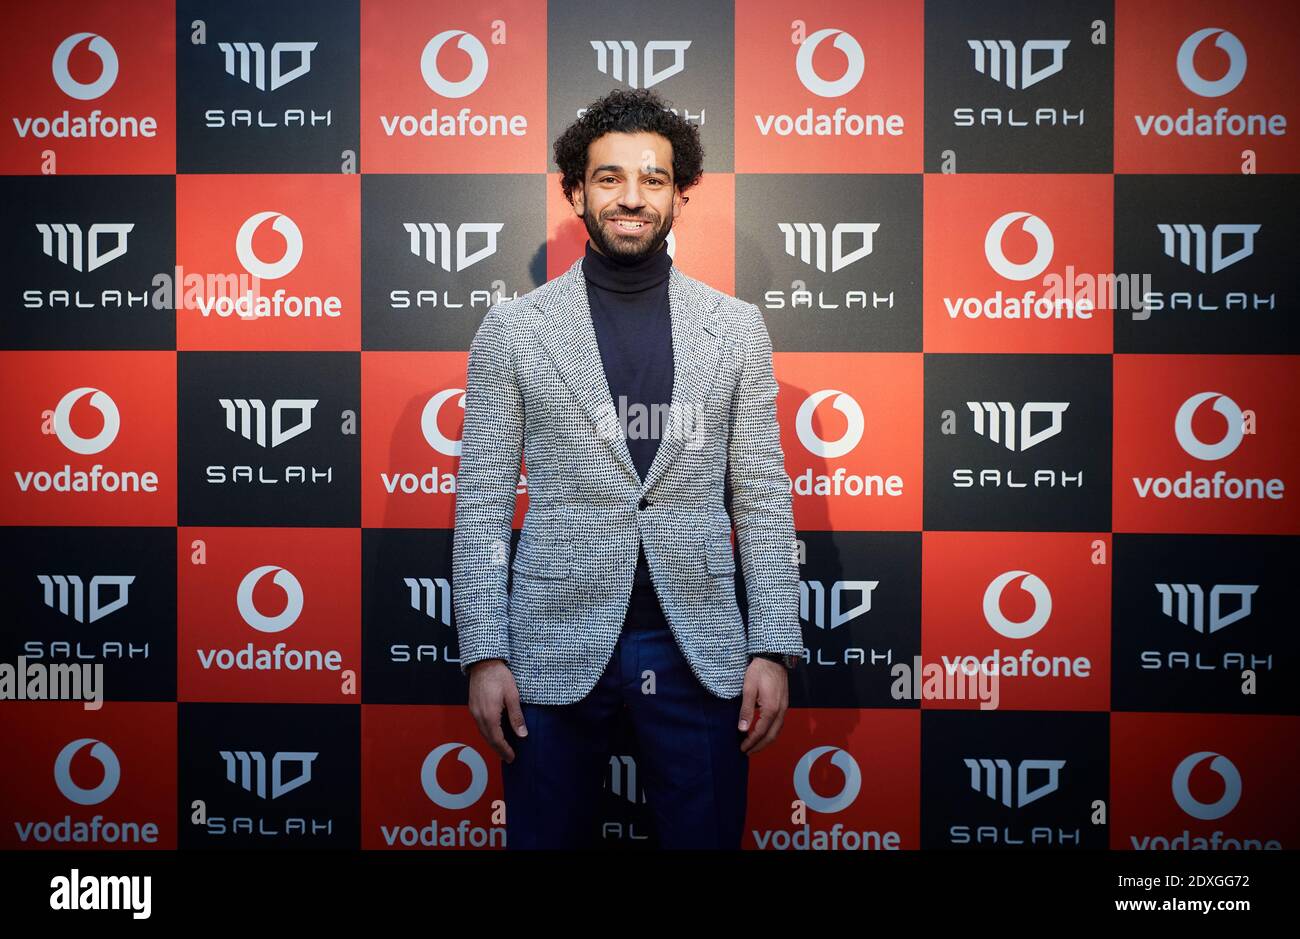 Mohamed Salah Hamed Mahrous Ghaly is an Egyptian professional footballer who plays as a forward for Premier League club Liverpool and the Egypt nation Stock Photo